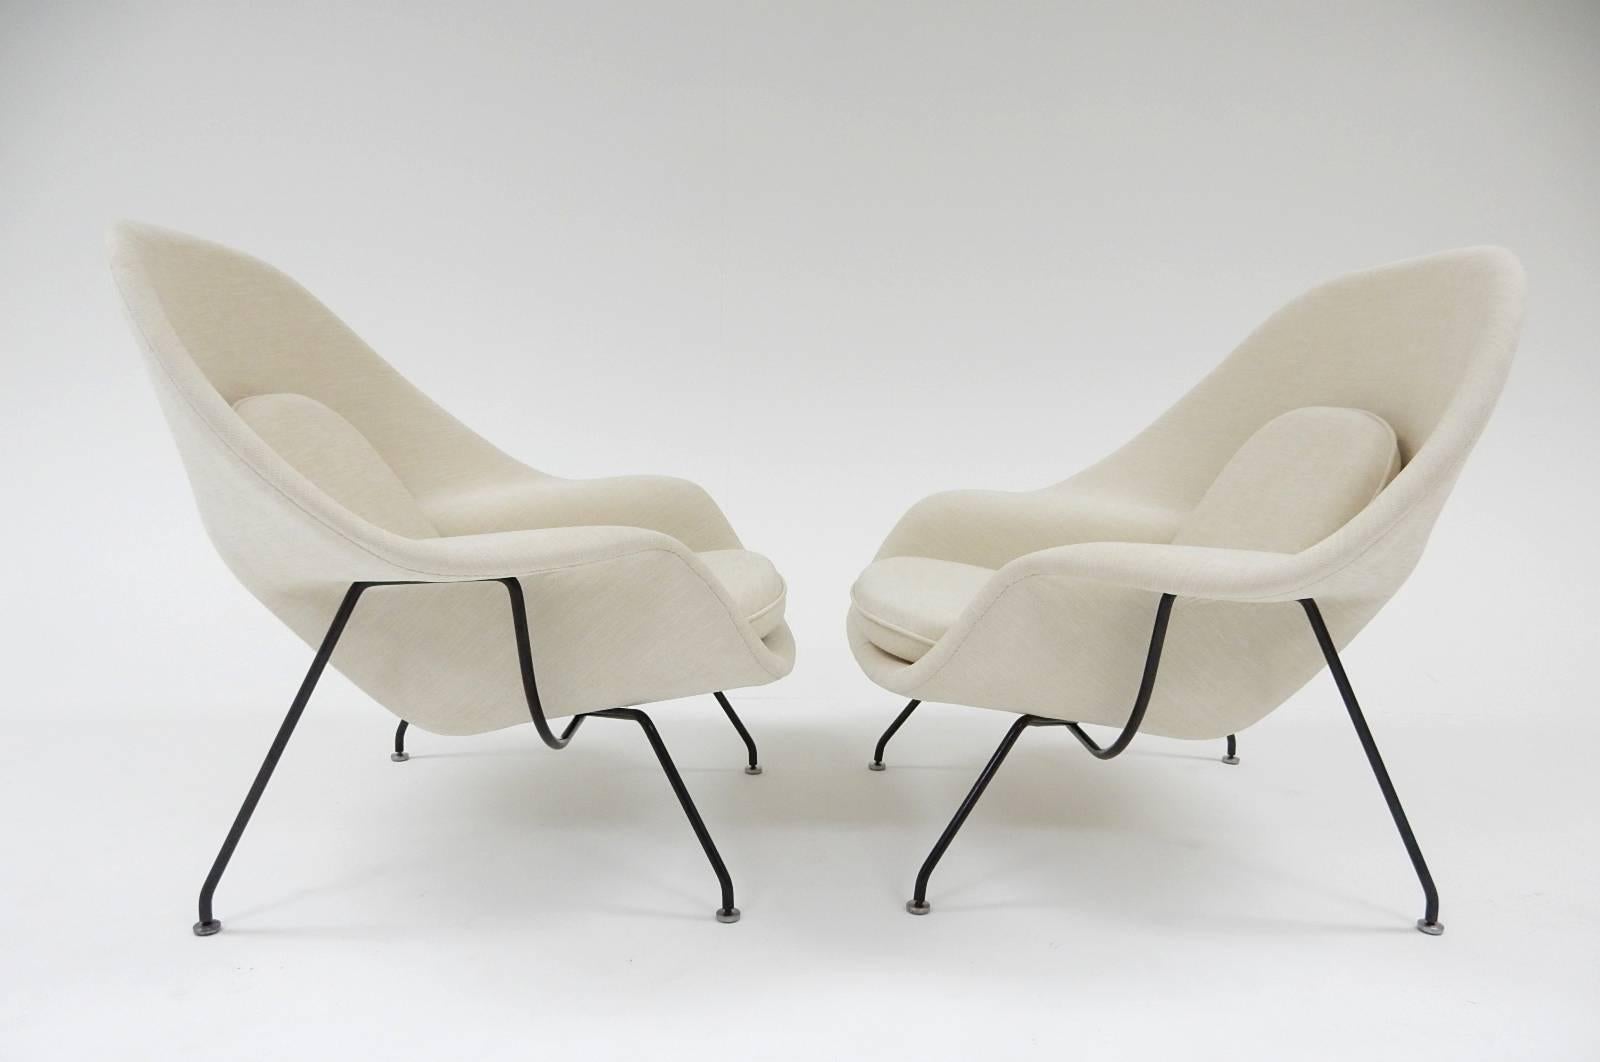 Own an original! Pair of just reupholstered, never sat in Knoll lounge chairs designed by Eero Saarinen. These are early 1960s models.
They have been professionally restored to perfection.
 